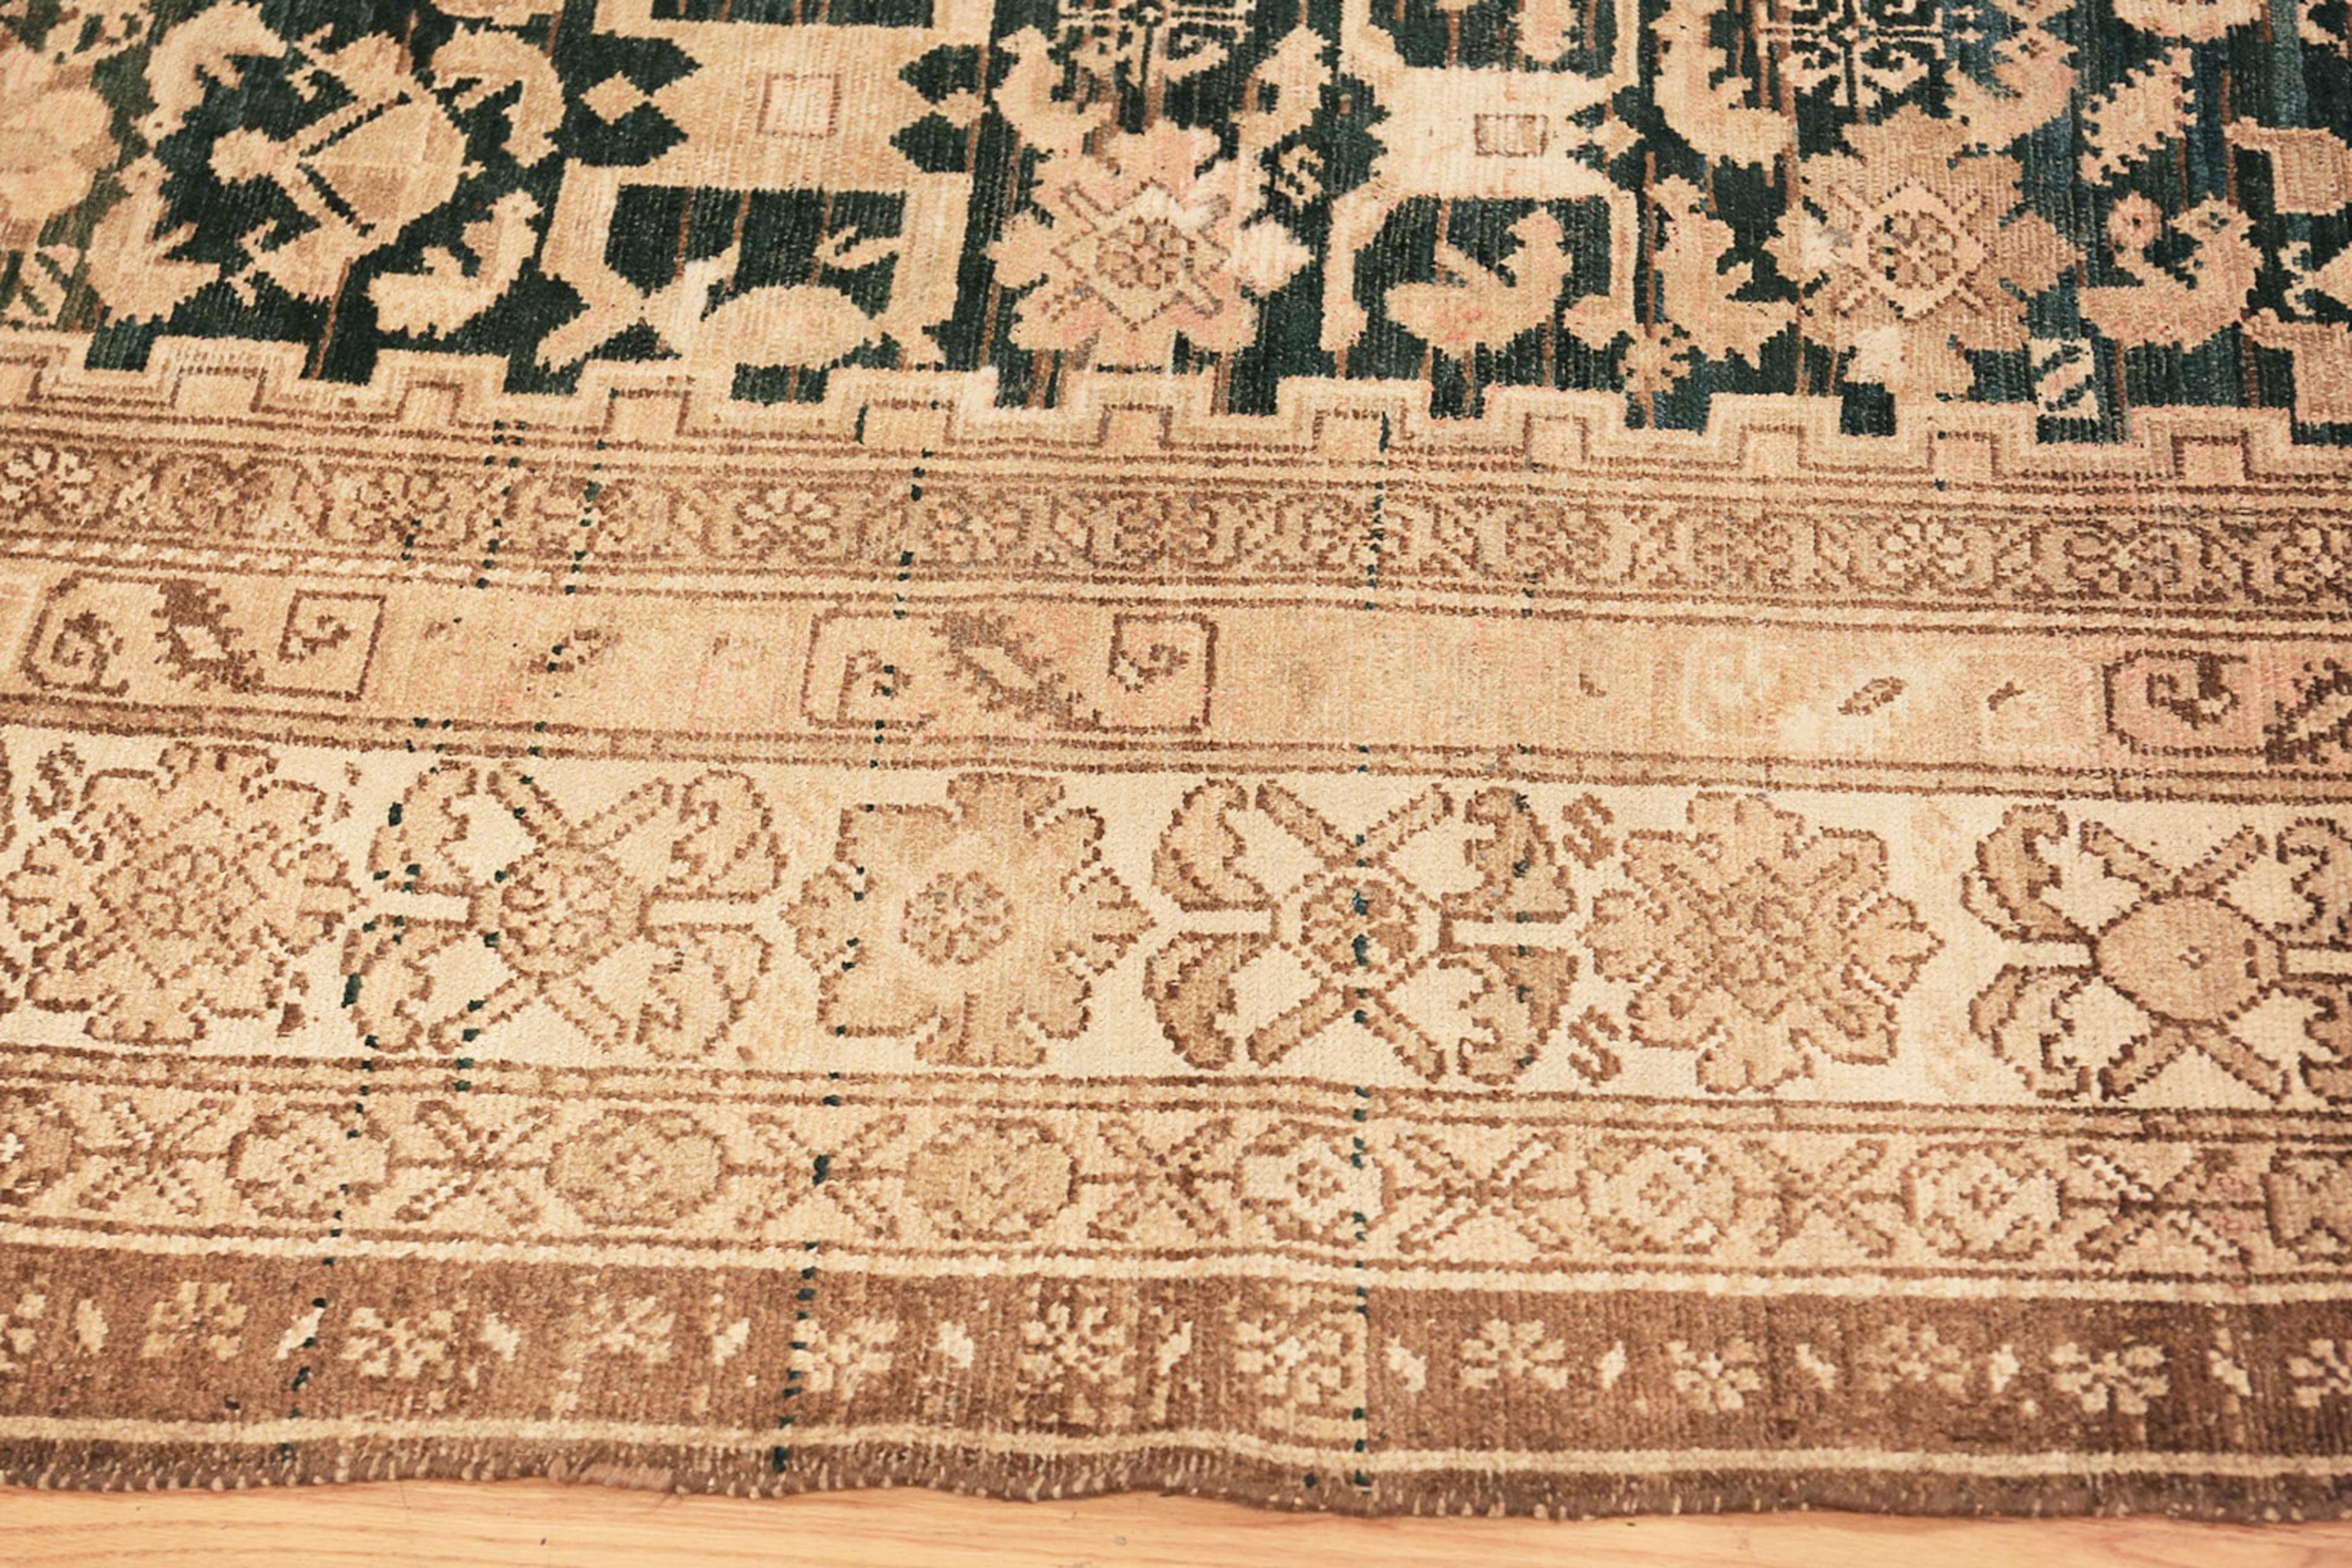 Gallery Size Antique Tribal Persian Malayer Rug 7 ft x 15 ft 7 in In Good Condition For Sale In New York, NY